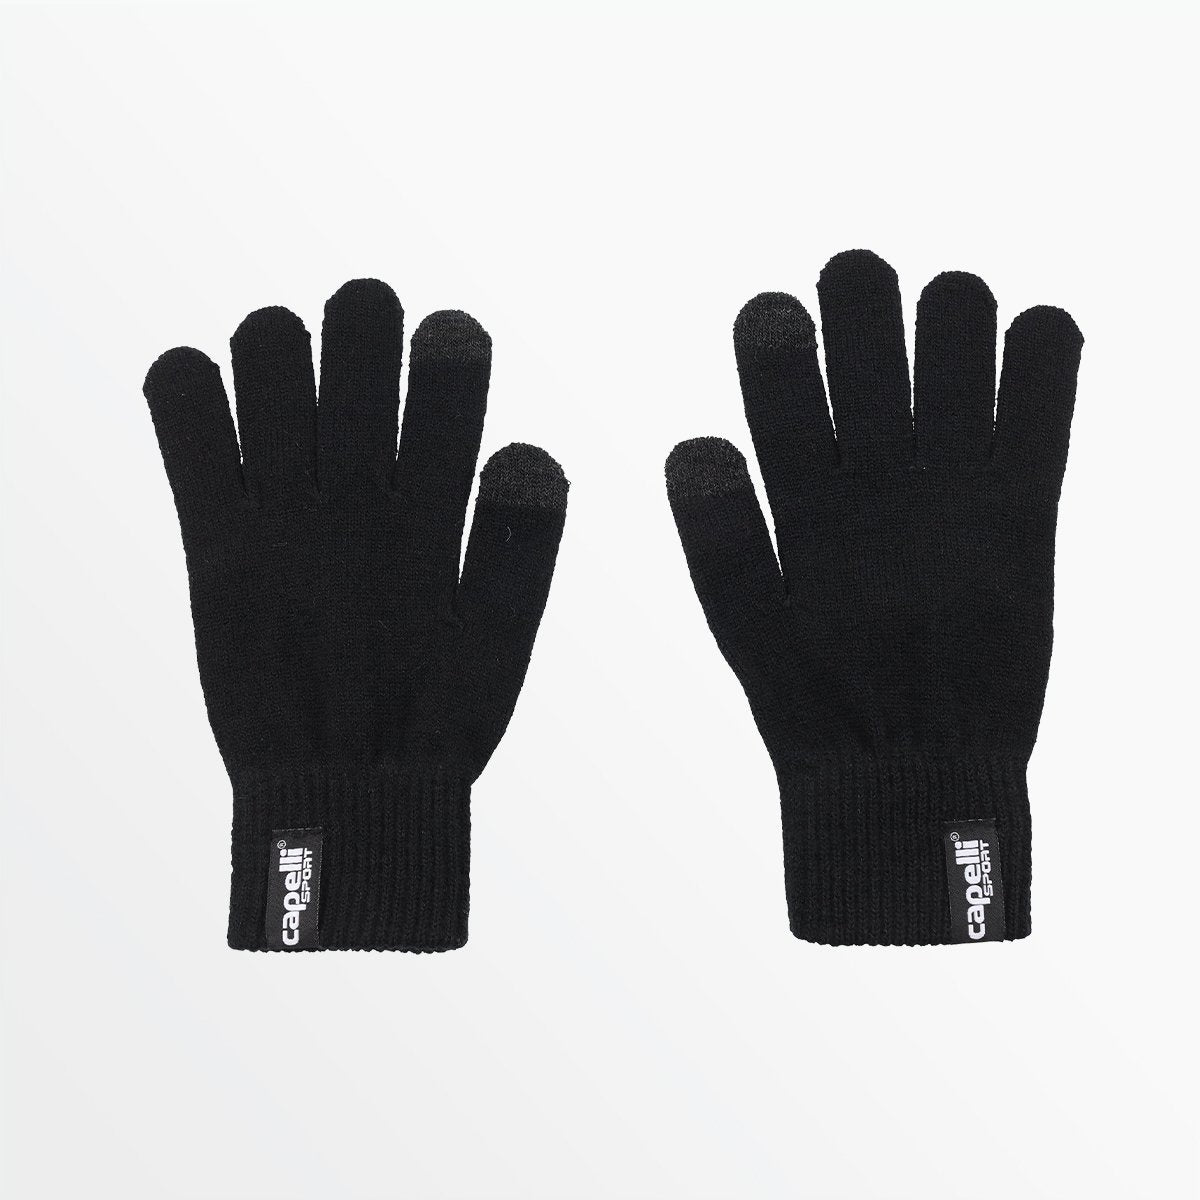 YOUTH TECH MAGIC GLOVES, 3-PACK